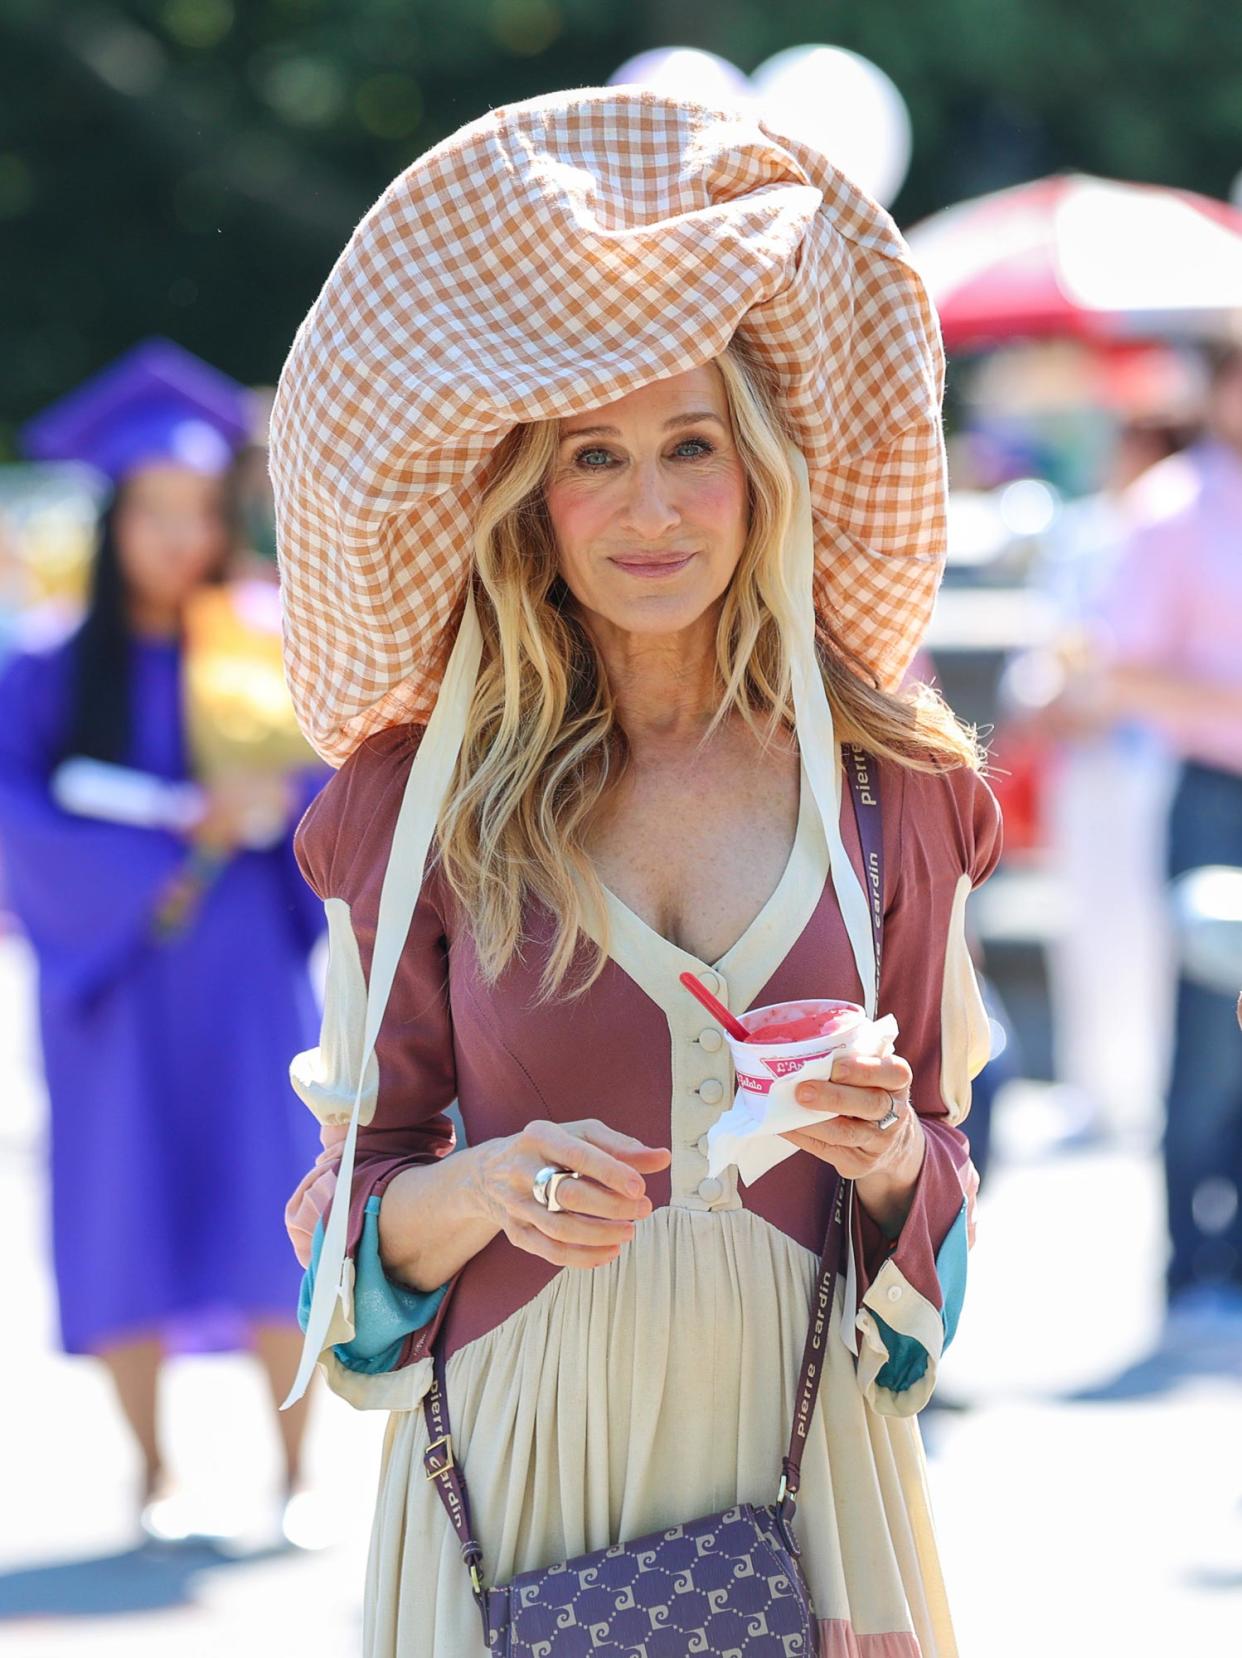 Sarah Jessica Parker Wears Questionable Hat While Filming Season 3 of And Just Like That 290